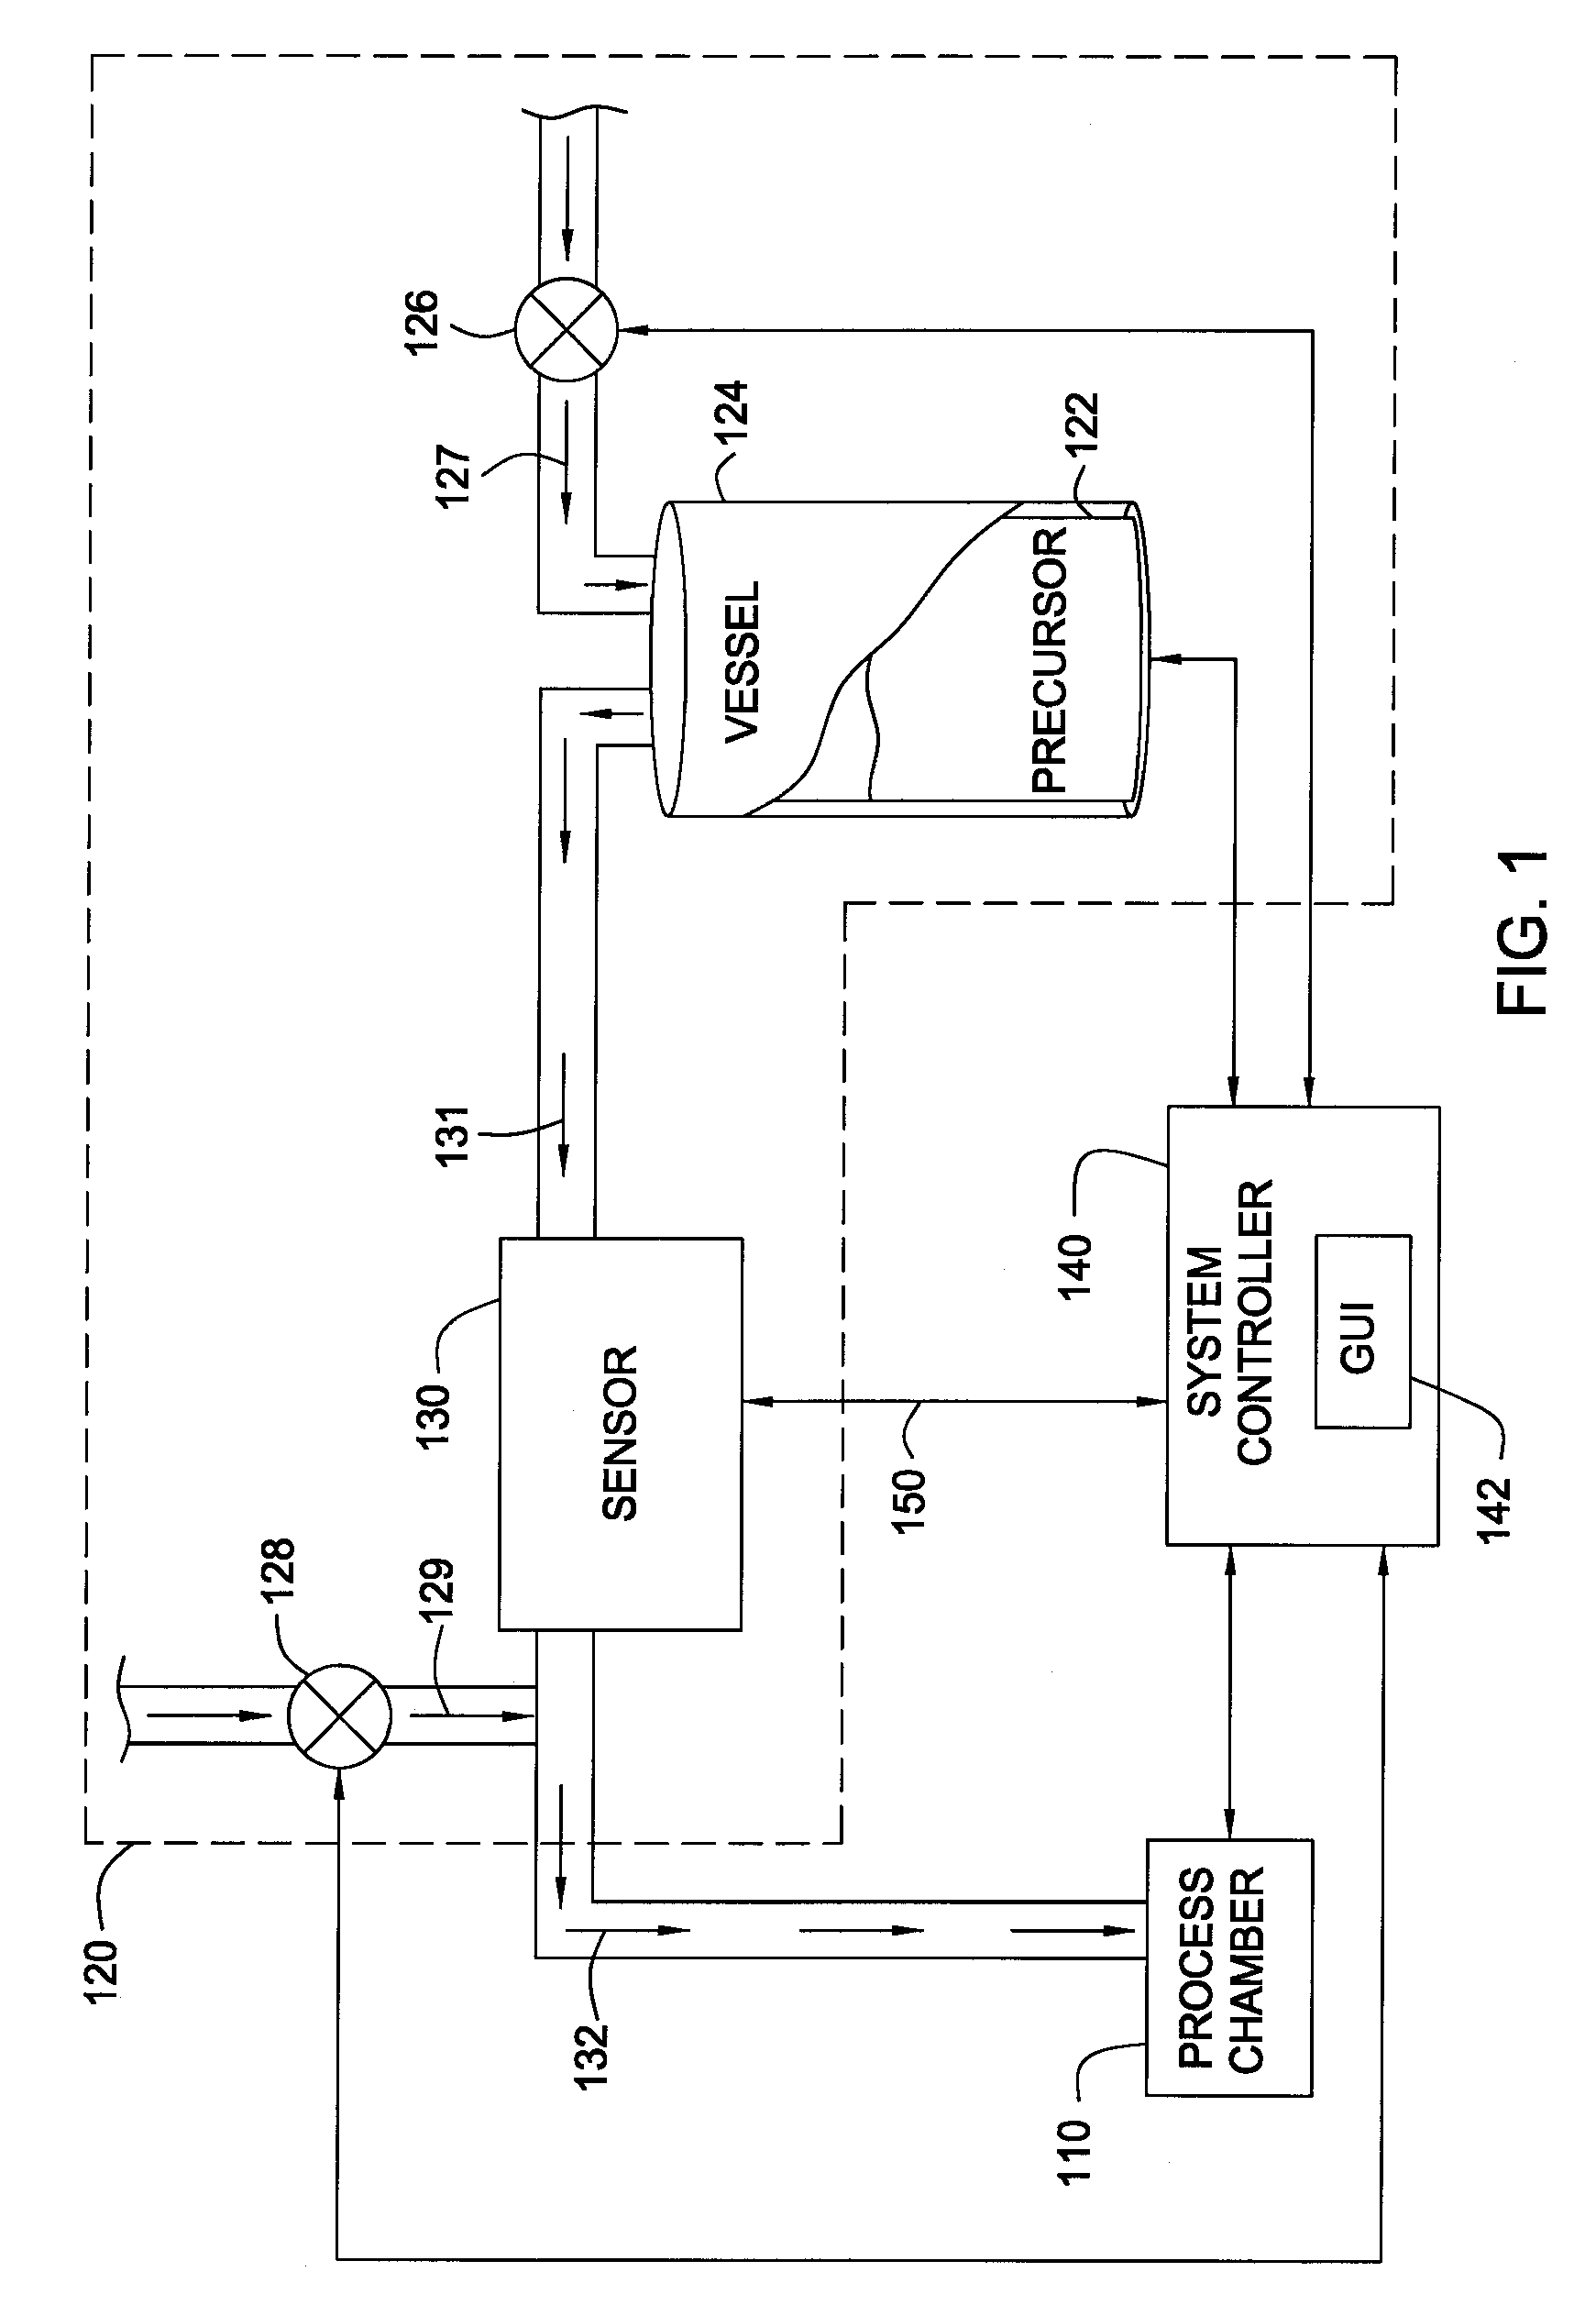 Rate control process for a precursor delivery system